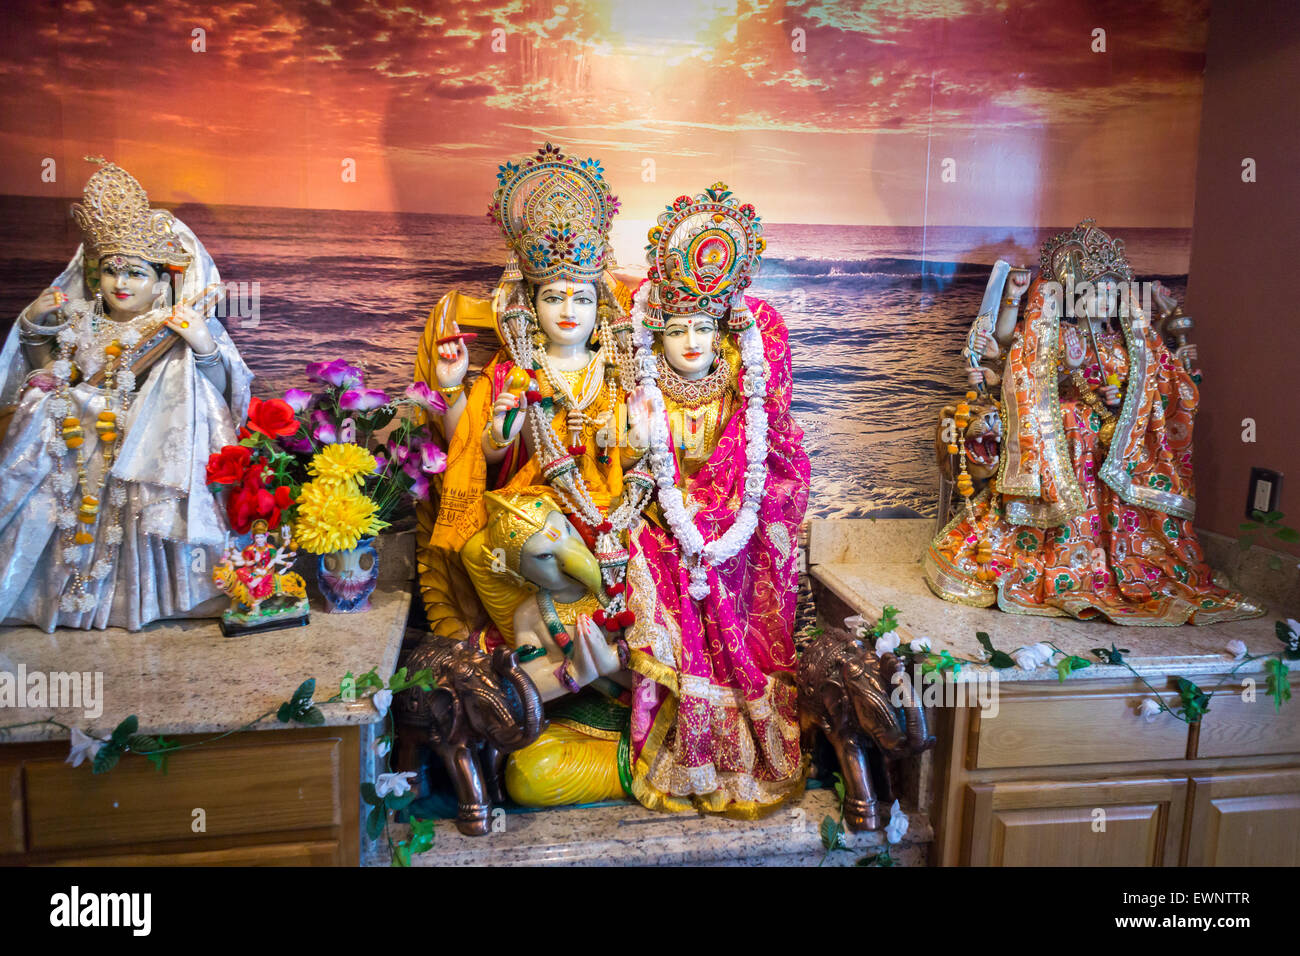 Statuary of Gods on an altar in a temple in Richmond Hill in the New York borough of Queens on Thursday, June 25, 2015. The neighborhood of Richmond Hill is a polyglot of ethnic cultures. It is home to Pakistanis, Indians, Guyanese and has a large Sikh population.  (© Richard B. Levine) Stock Photo